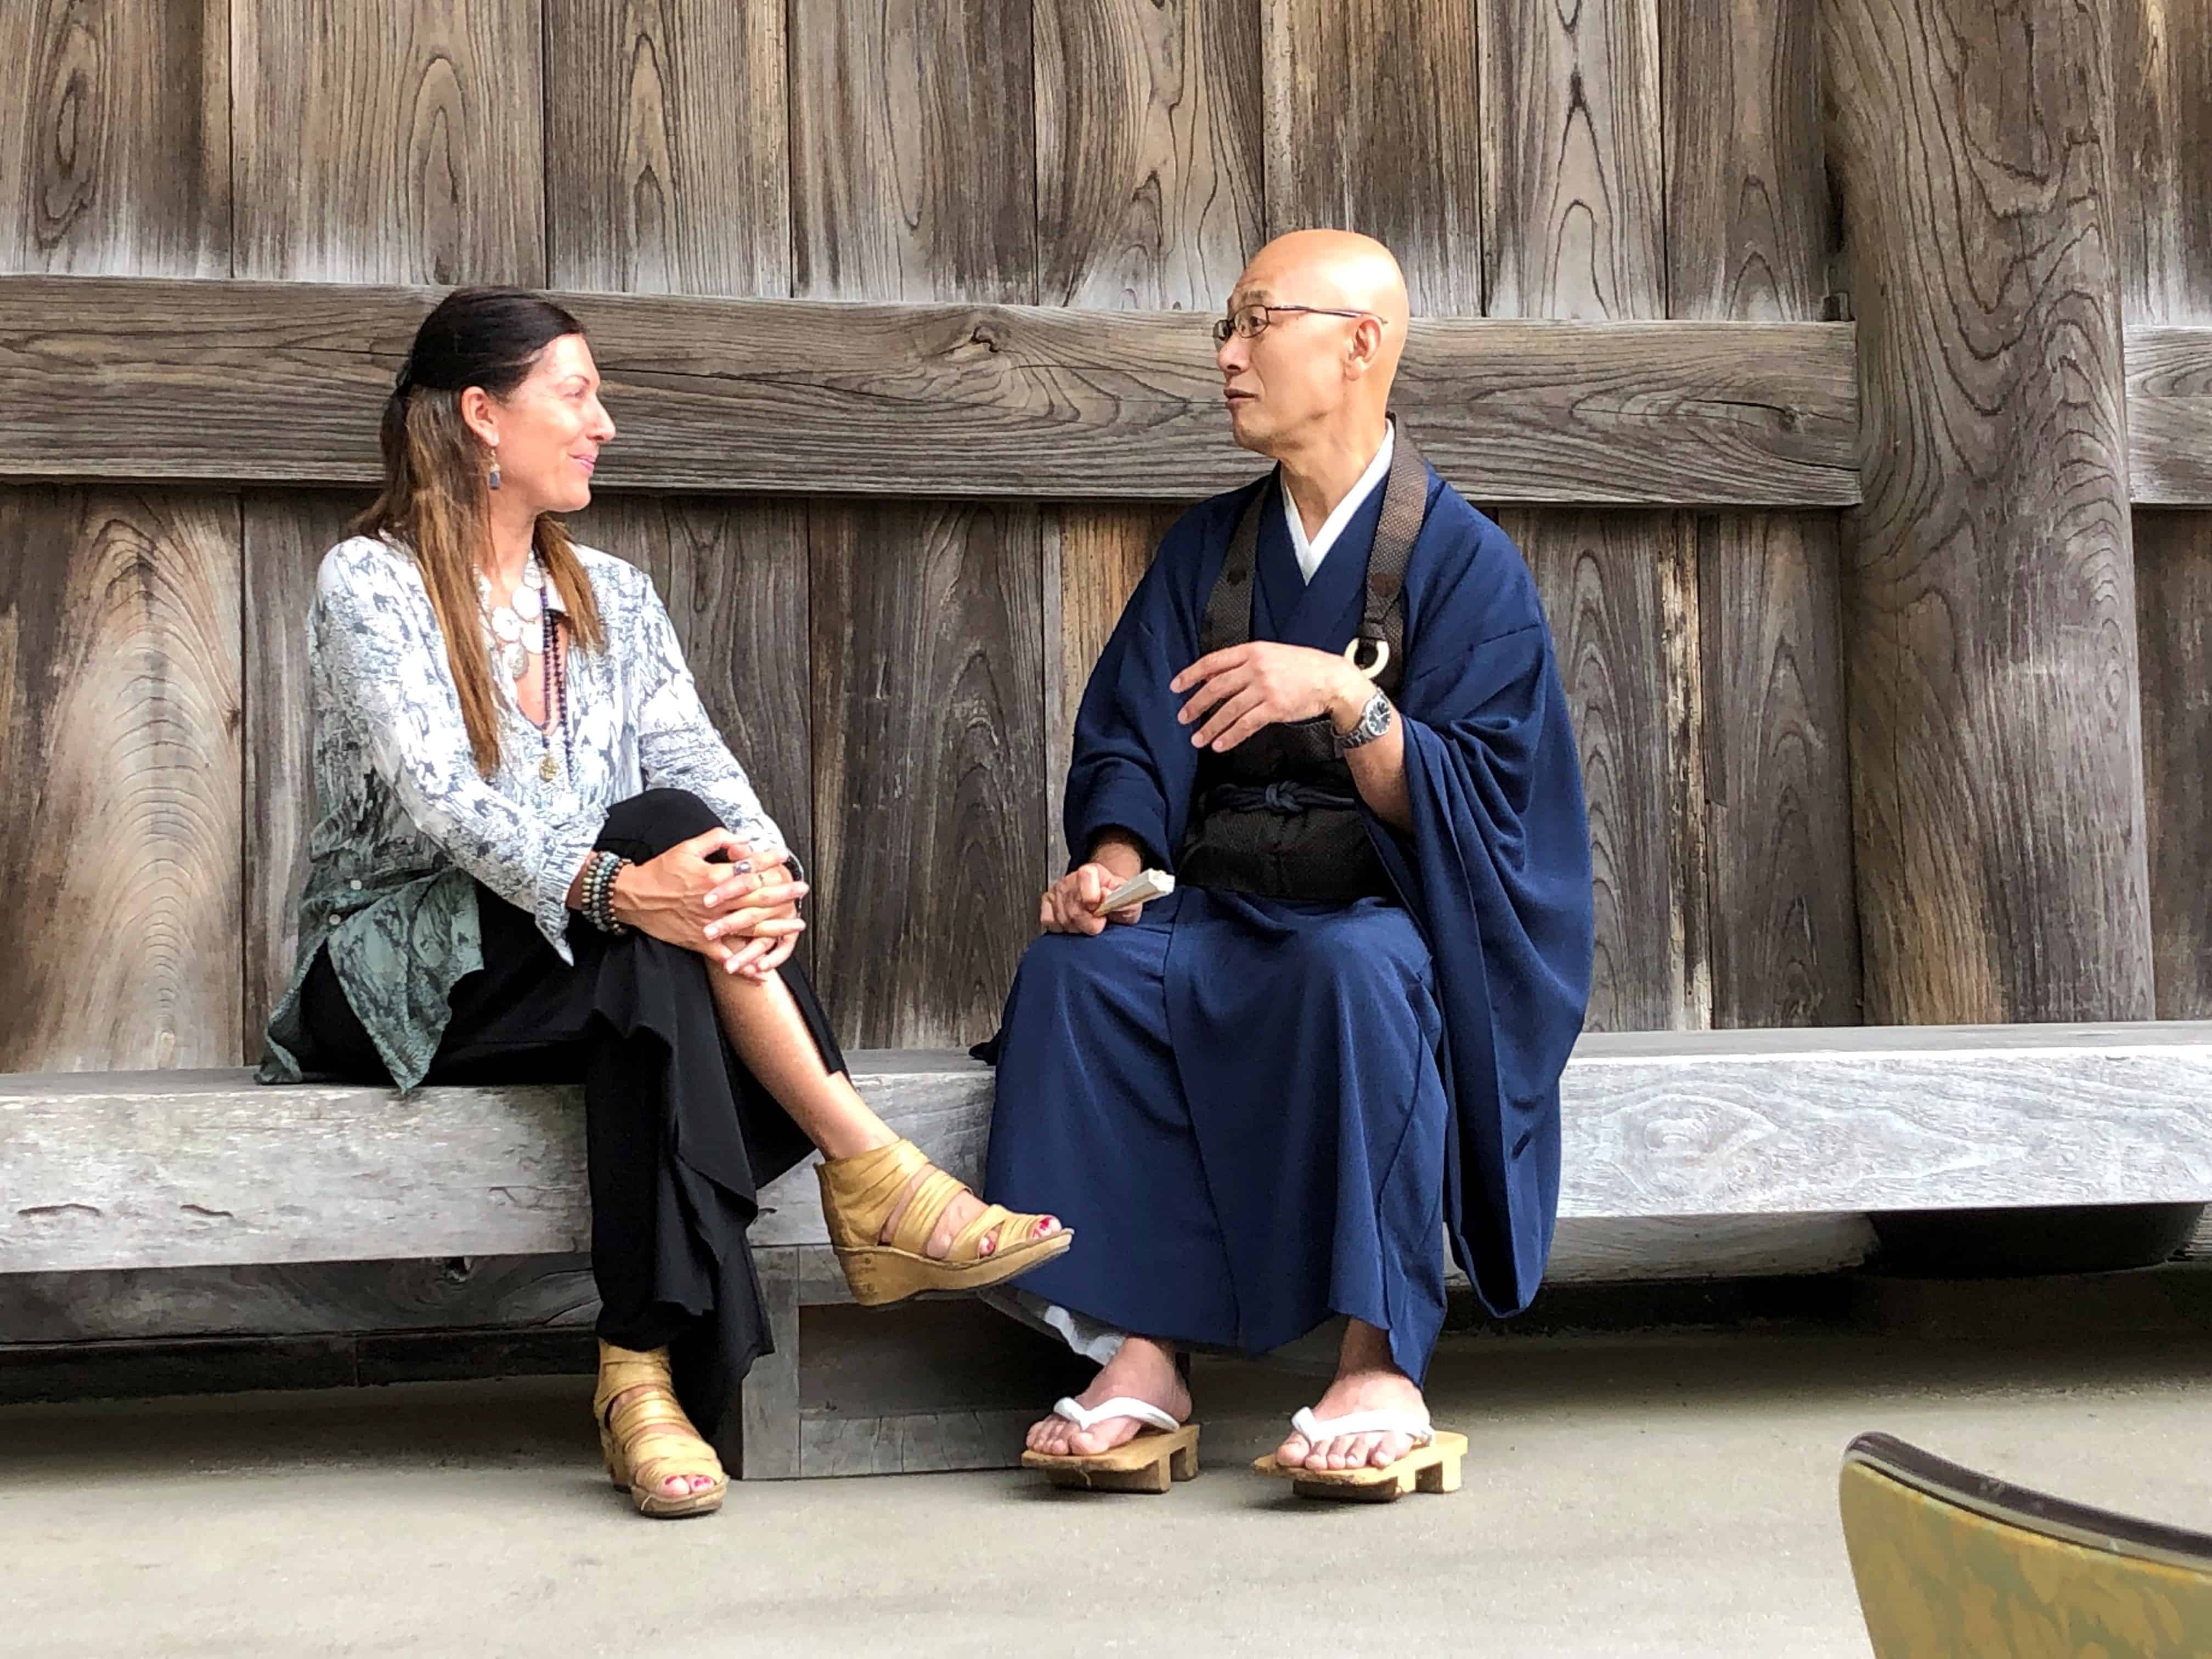 My interview with Zen 2.0 speaker Issho Fujita, who gave a standalone talk on Deepening Your Connectedness to all things through Zazen, a practice